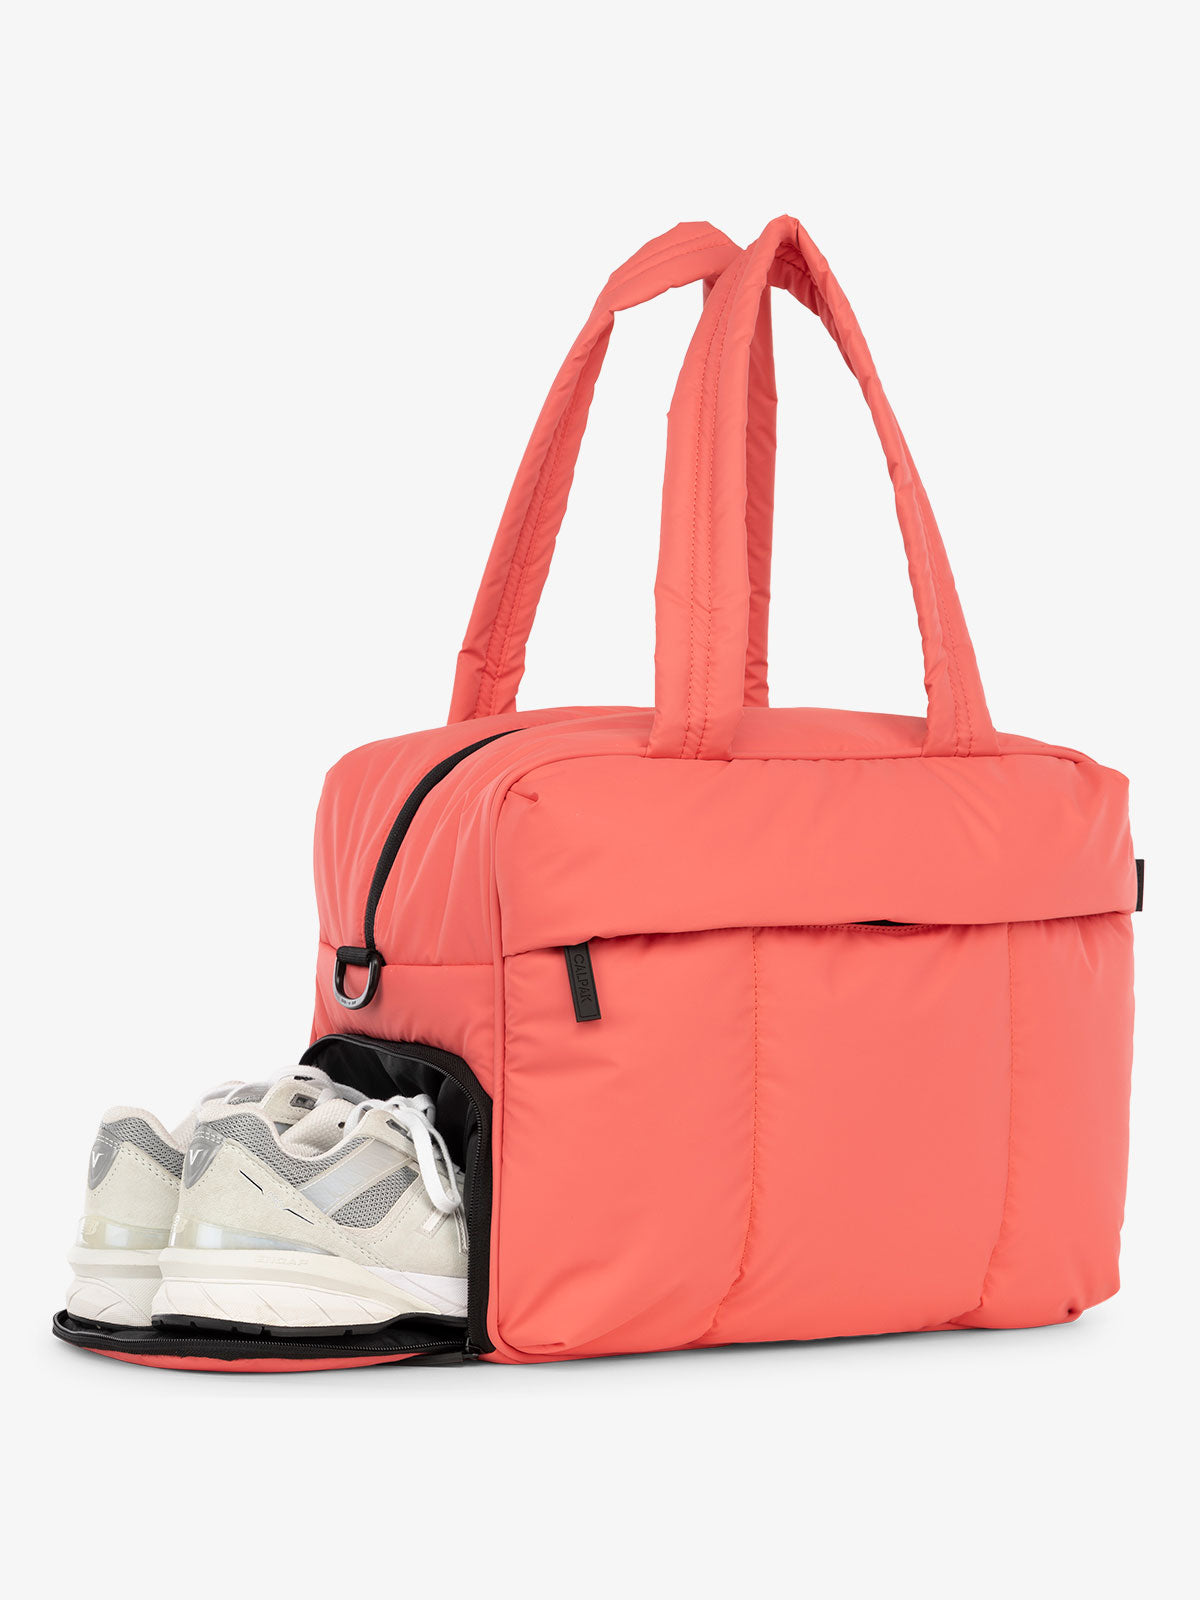 CALPAK Luka Duffel Bag with side shoe compartment and top handles in light watermelon pink